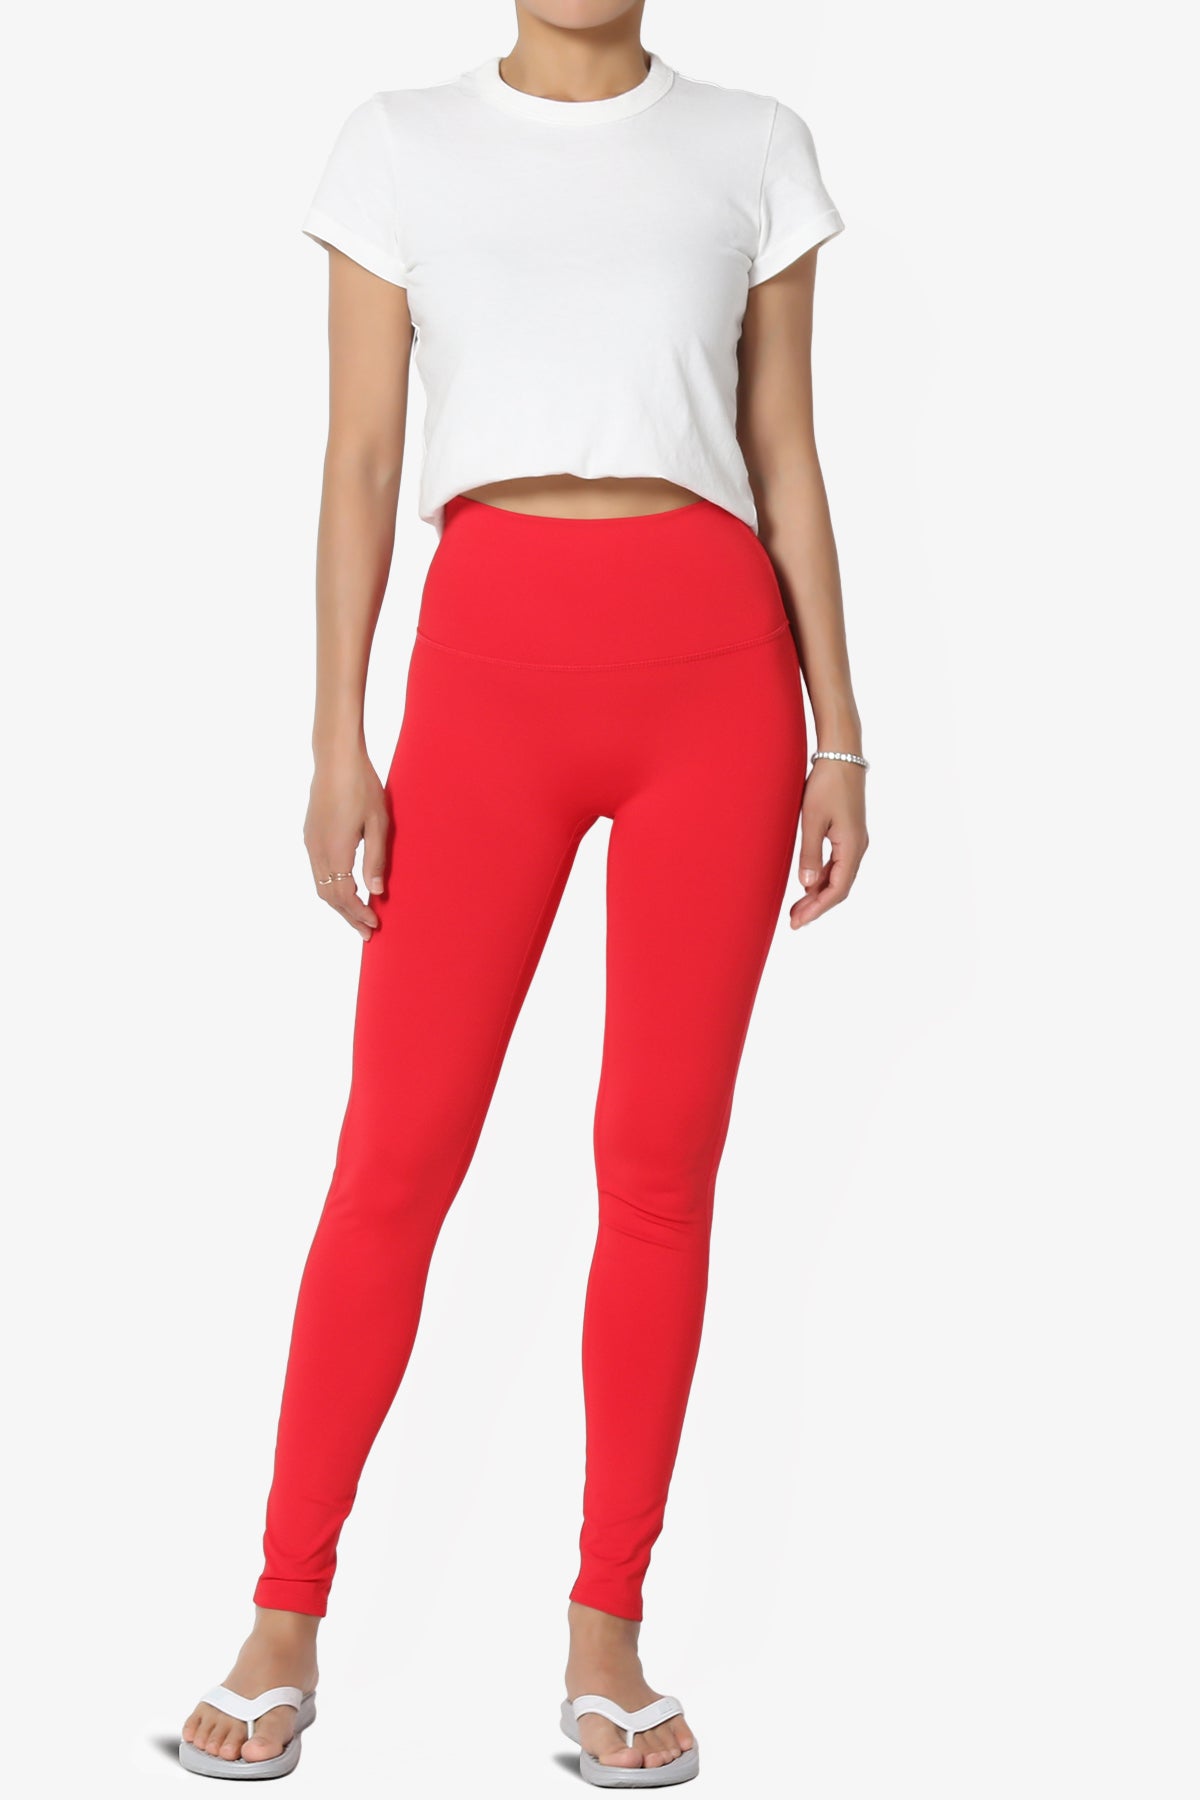 Load image into Gallery viewer, Mosco Athletic High Rise Ankle Leggings
